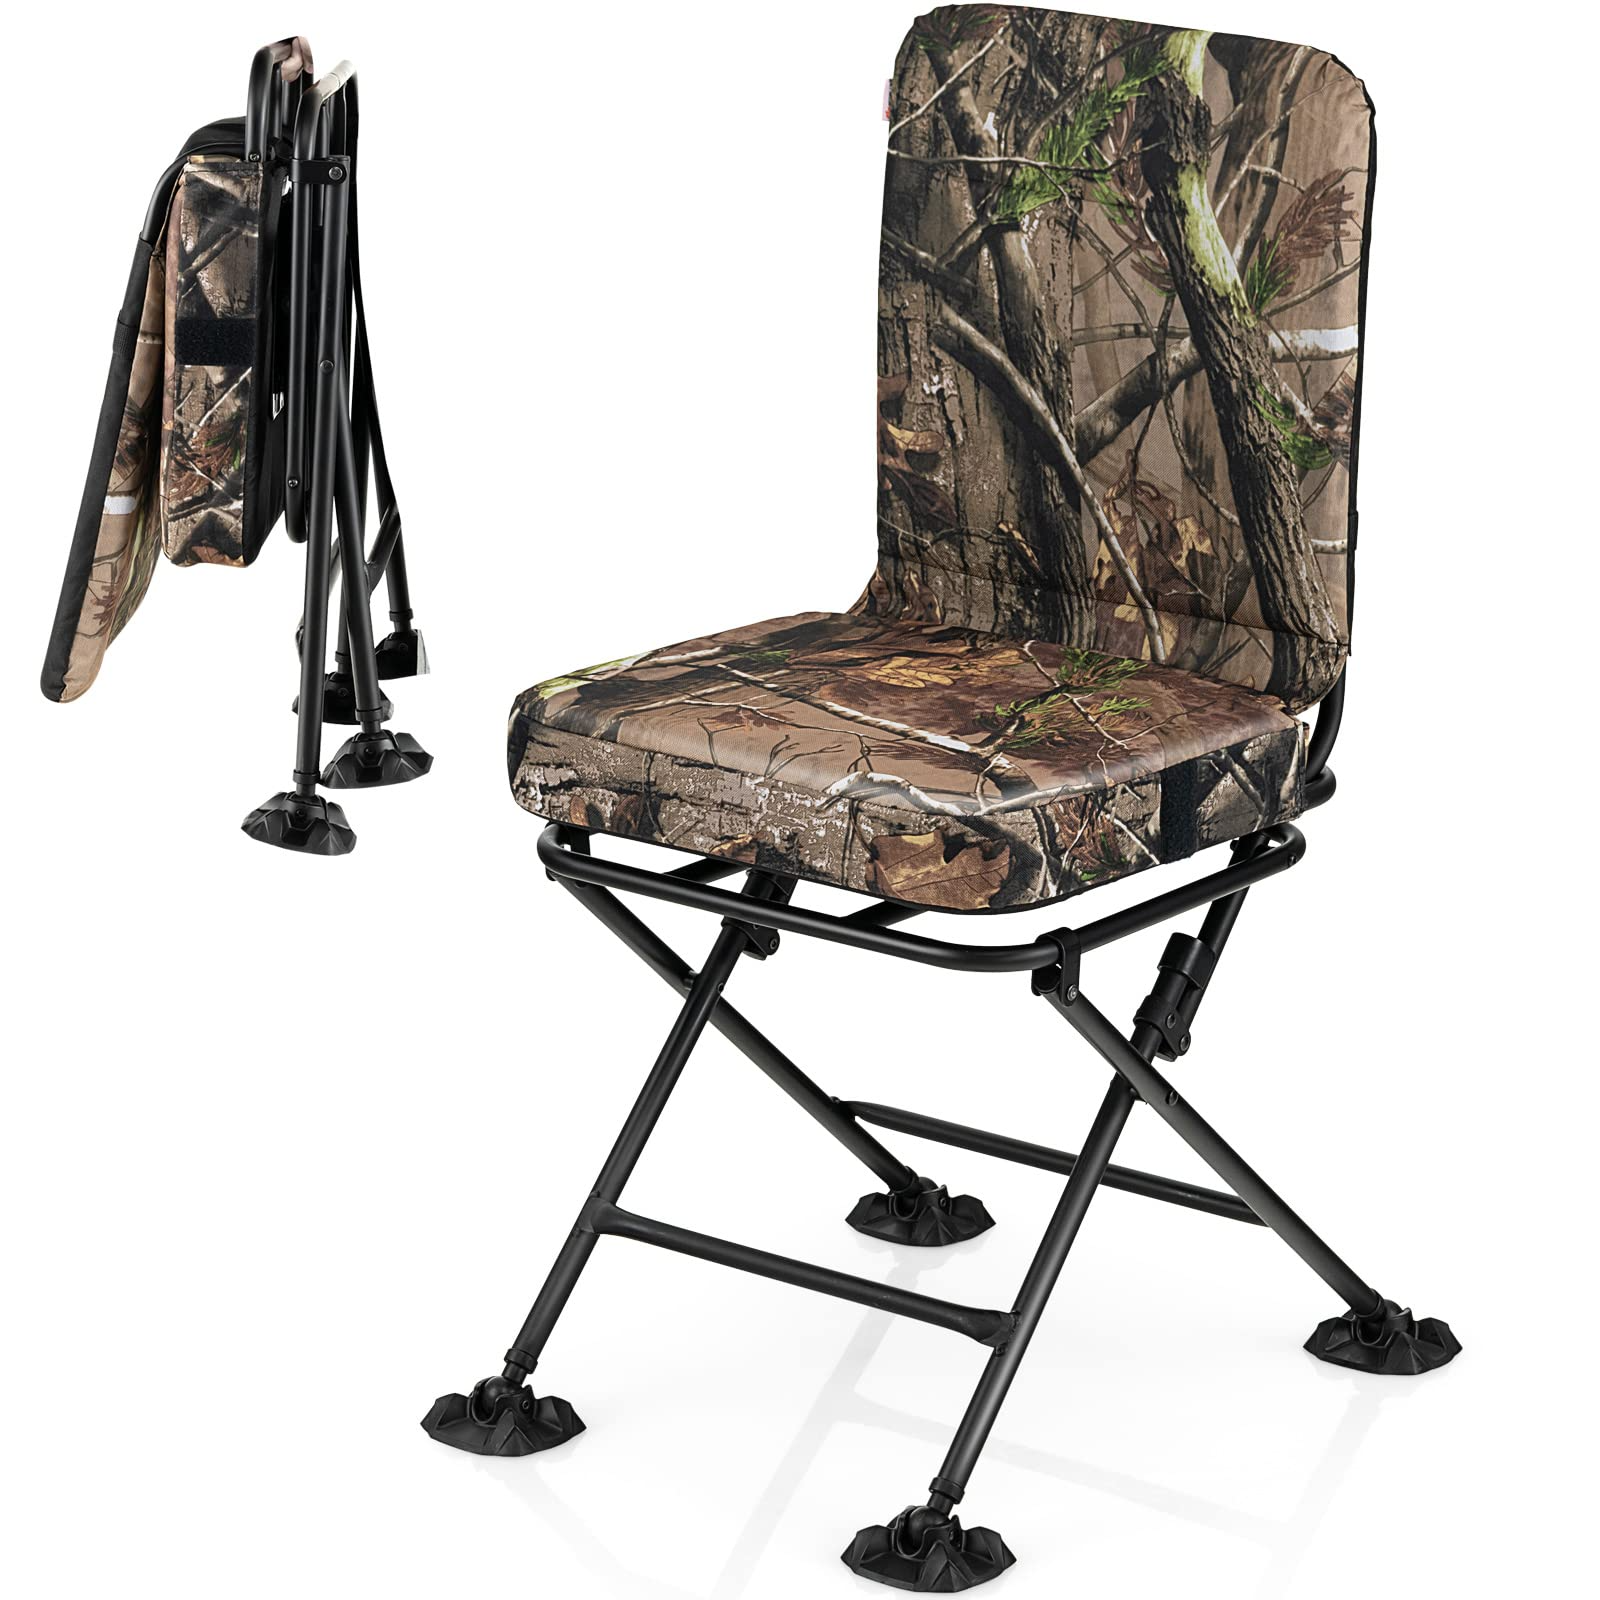 360 Degree Silent Swivel Blind Chair with 4 Adjustable Legs, Portable Folding Hunting Chairs for Blinds Fishing Camping